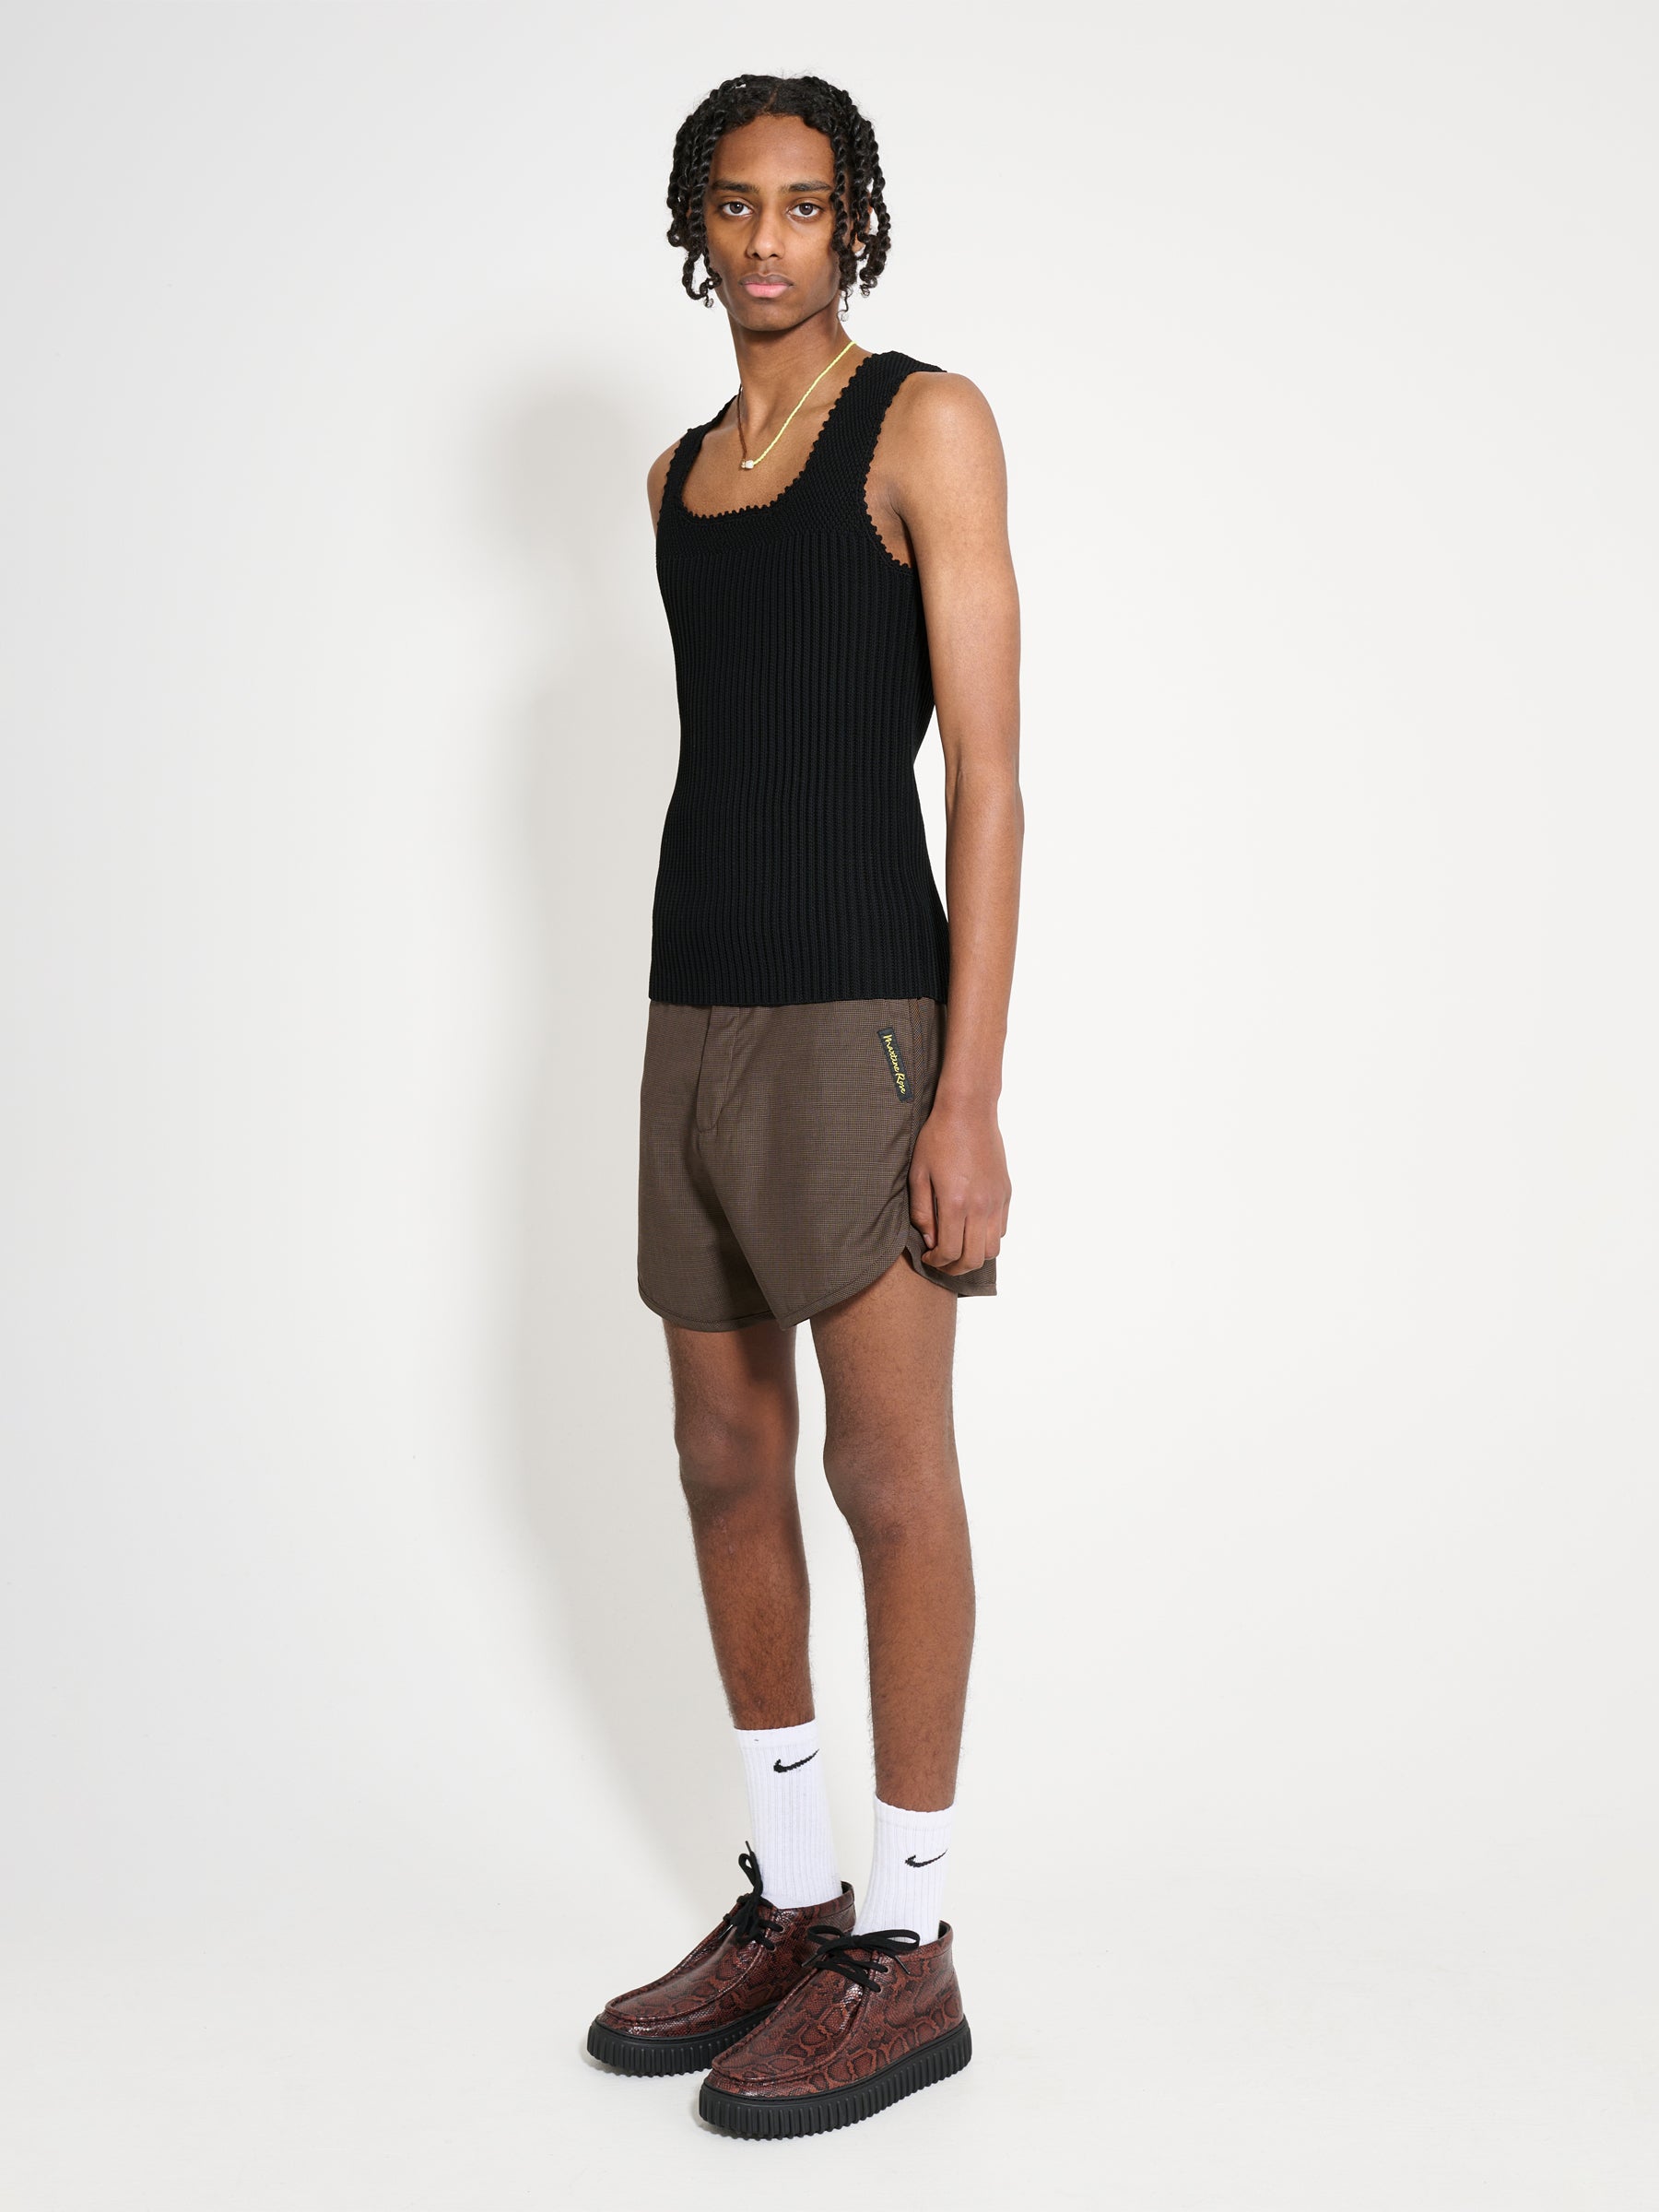 Martine Rose Tailored Gym Short Brown Houndstooth